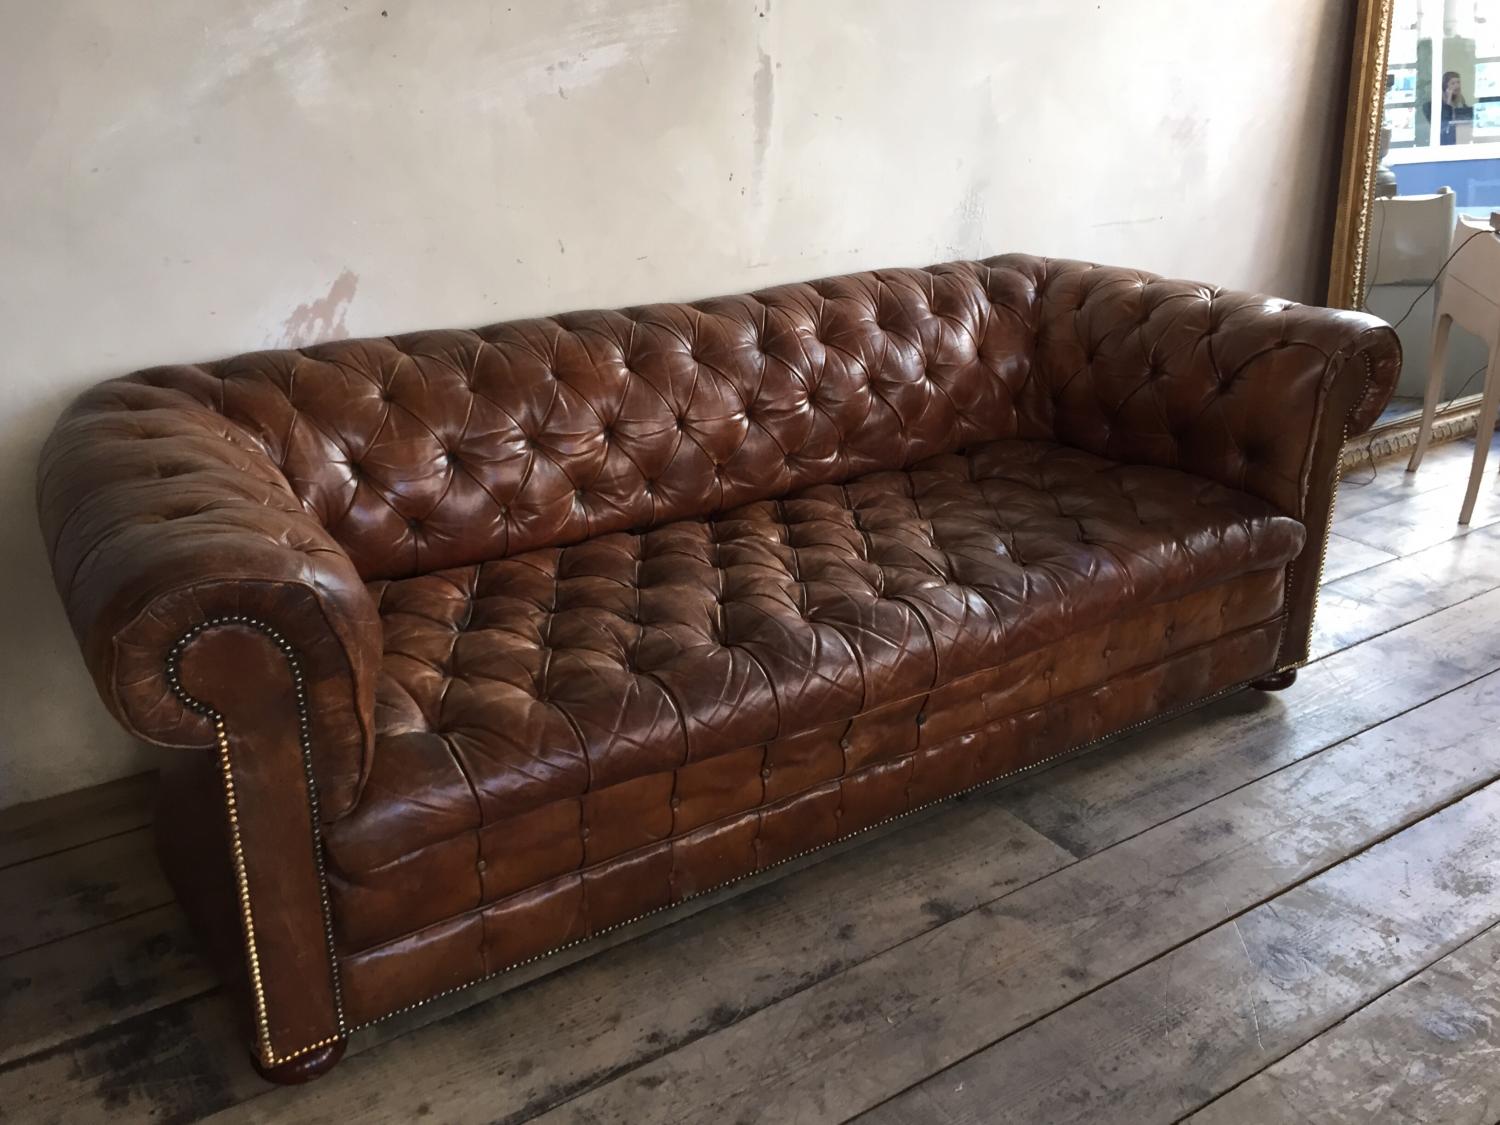 Tan leather chesterfield sofa